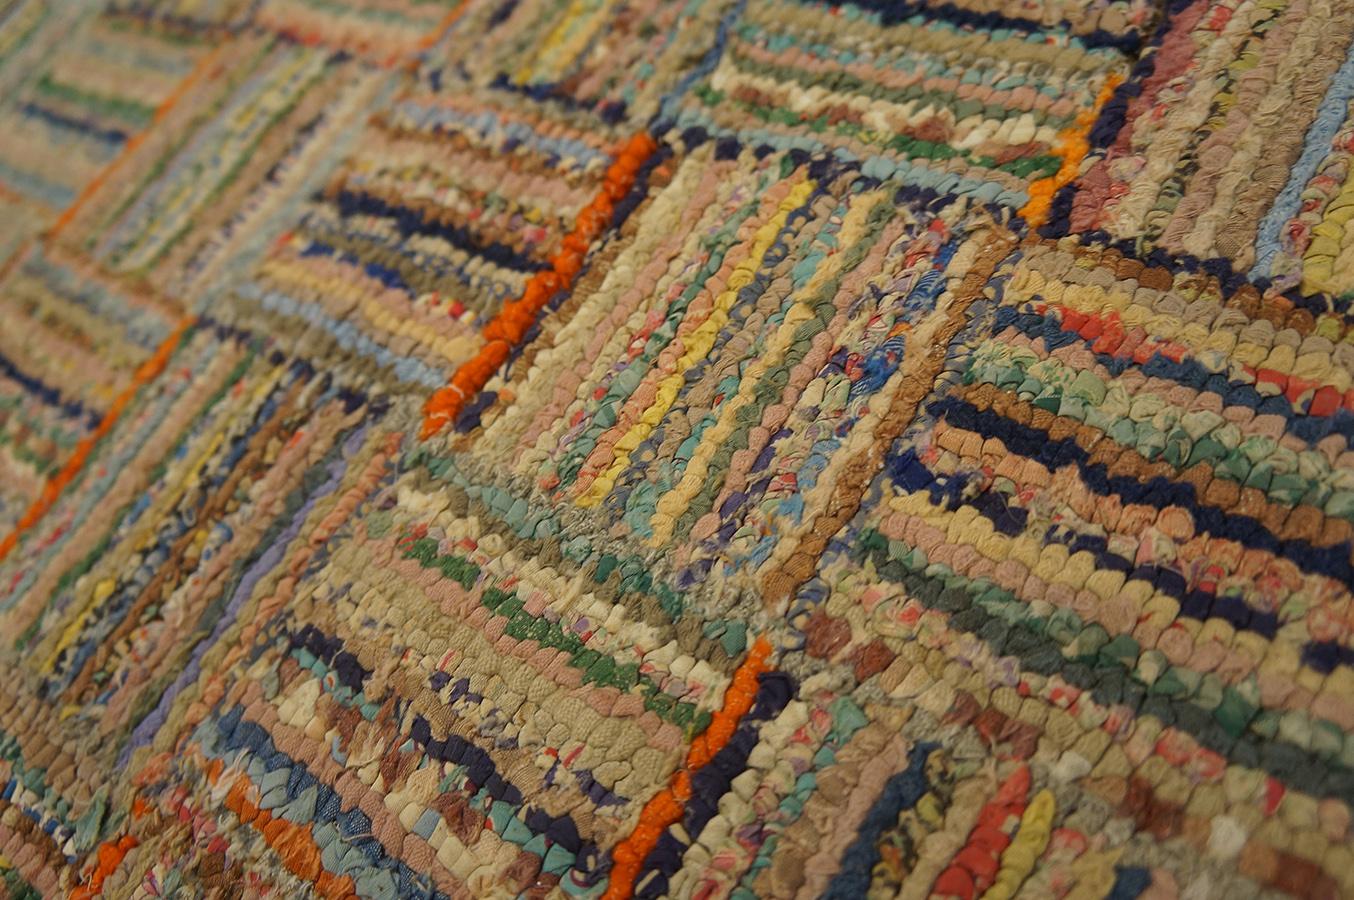 Early 20th Century American Hooked Rug ( 3' x 27'5